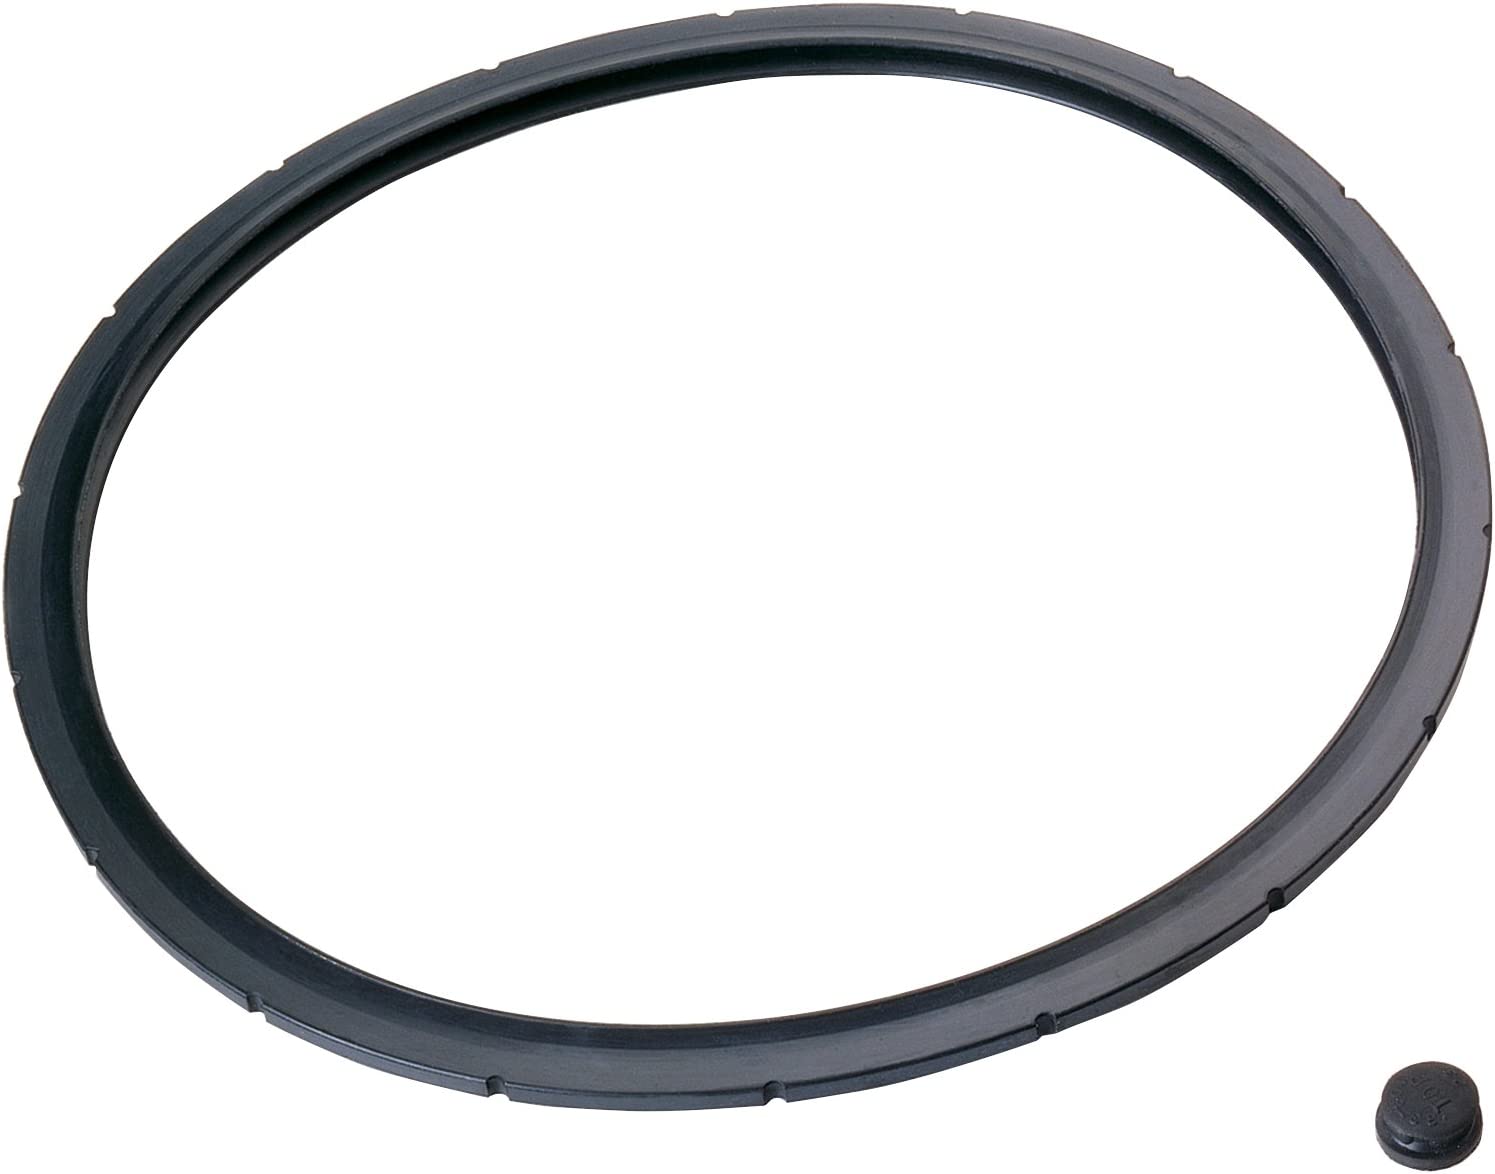  Pressure Cooker Gaskets Silicone Sealing Rings and